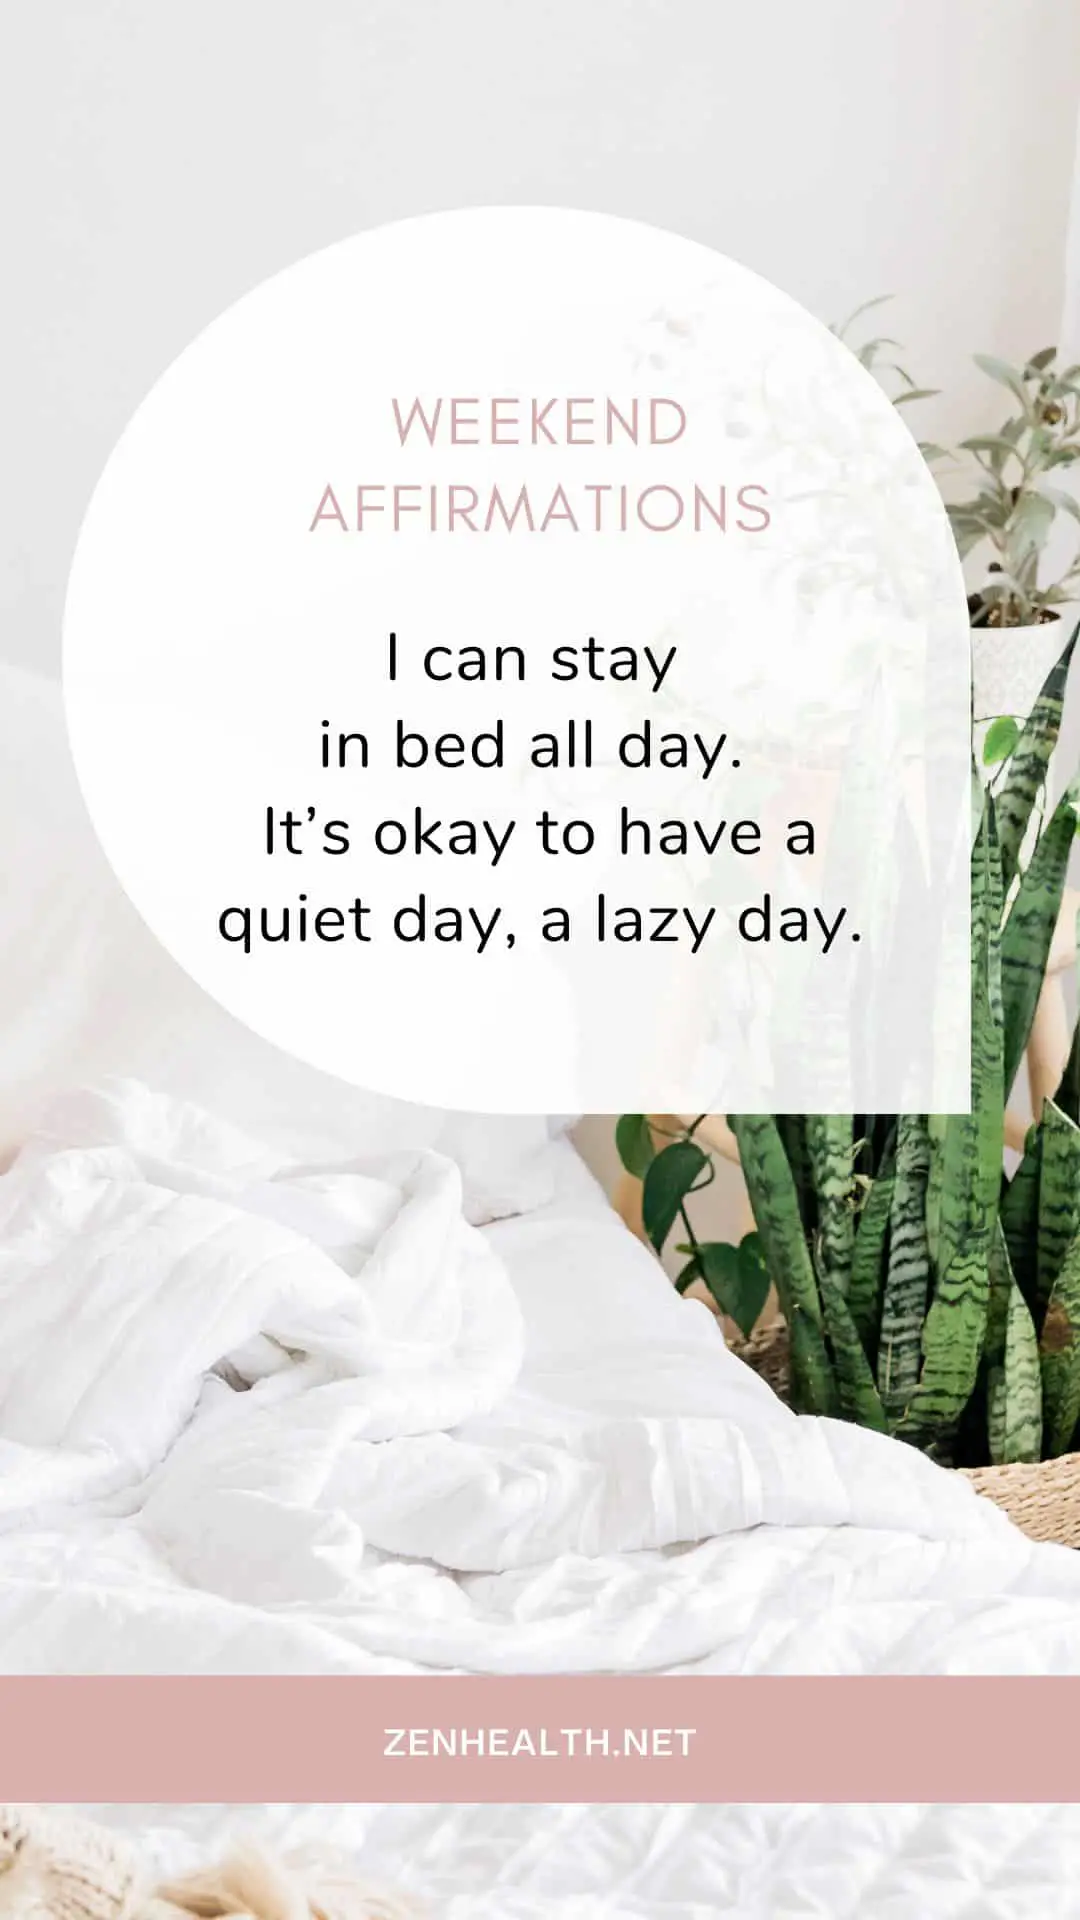 weekend affirmations: I can stay in bed all day. It's okay to have a quiet day, a lazy day